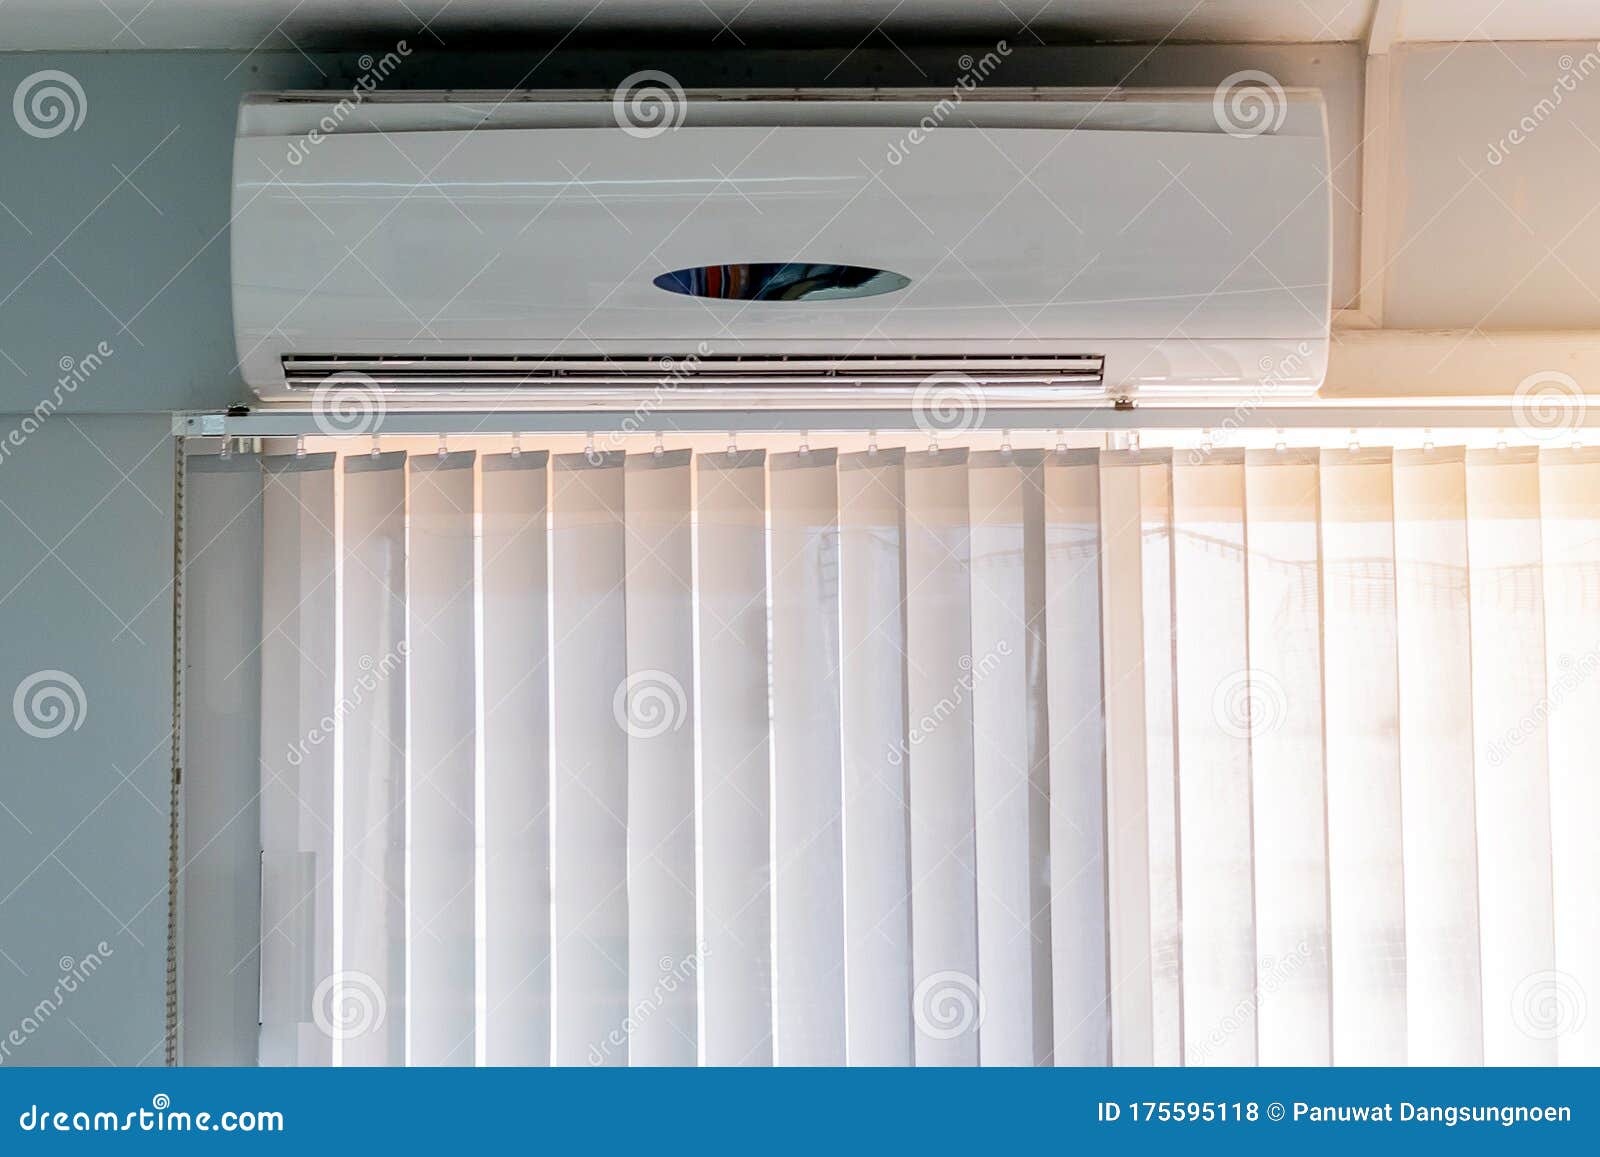 Air Conditioner Inside the Room of Office or House Stock Photo - Image